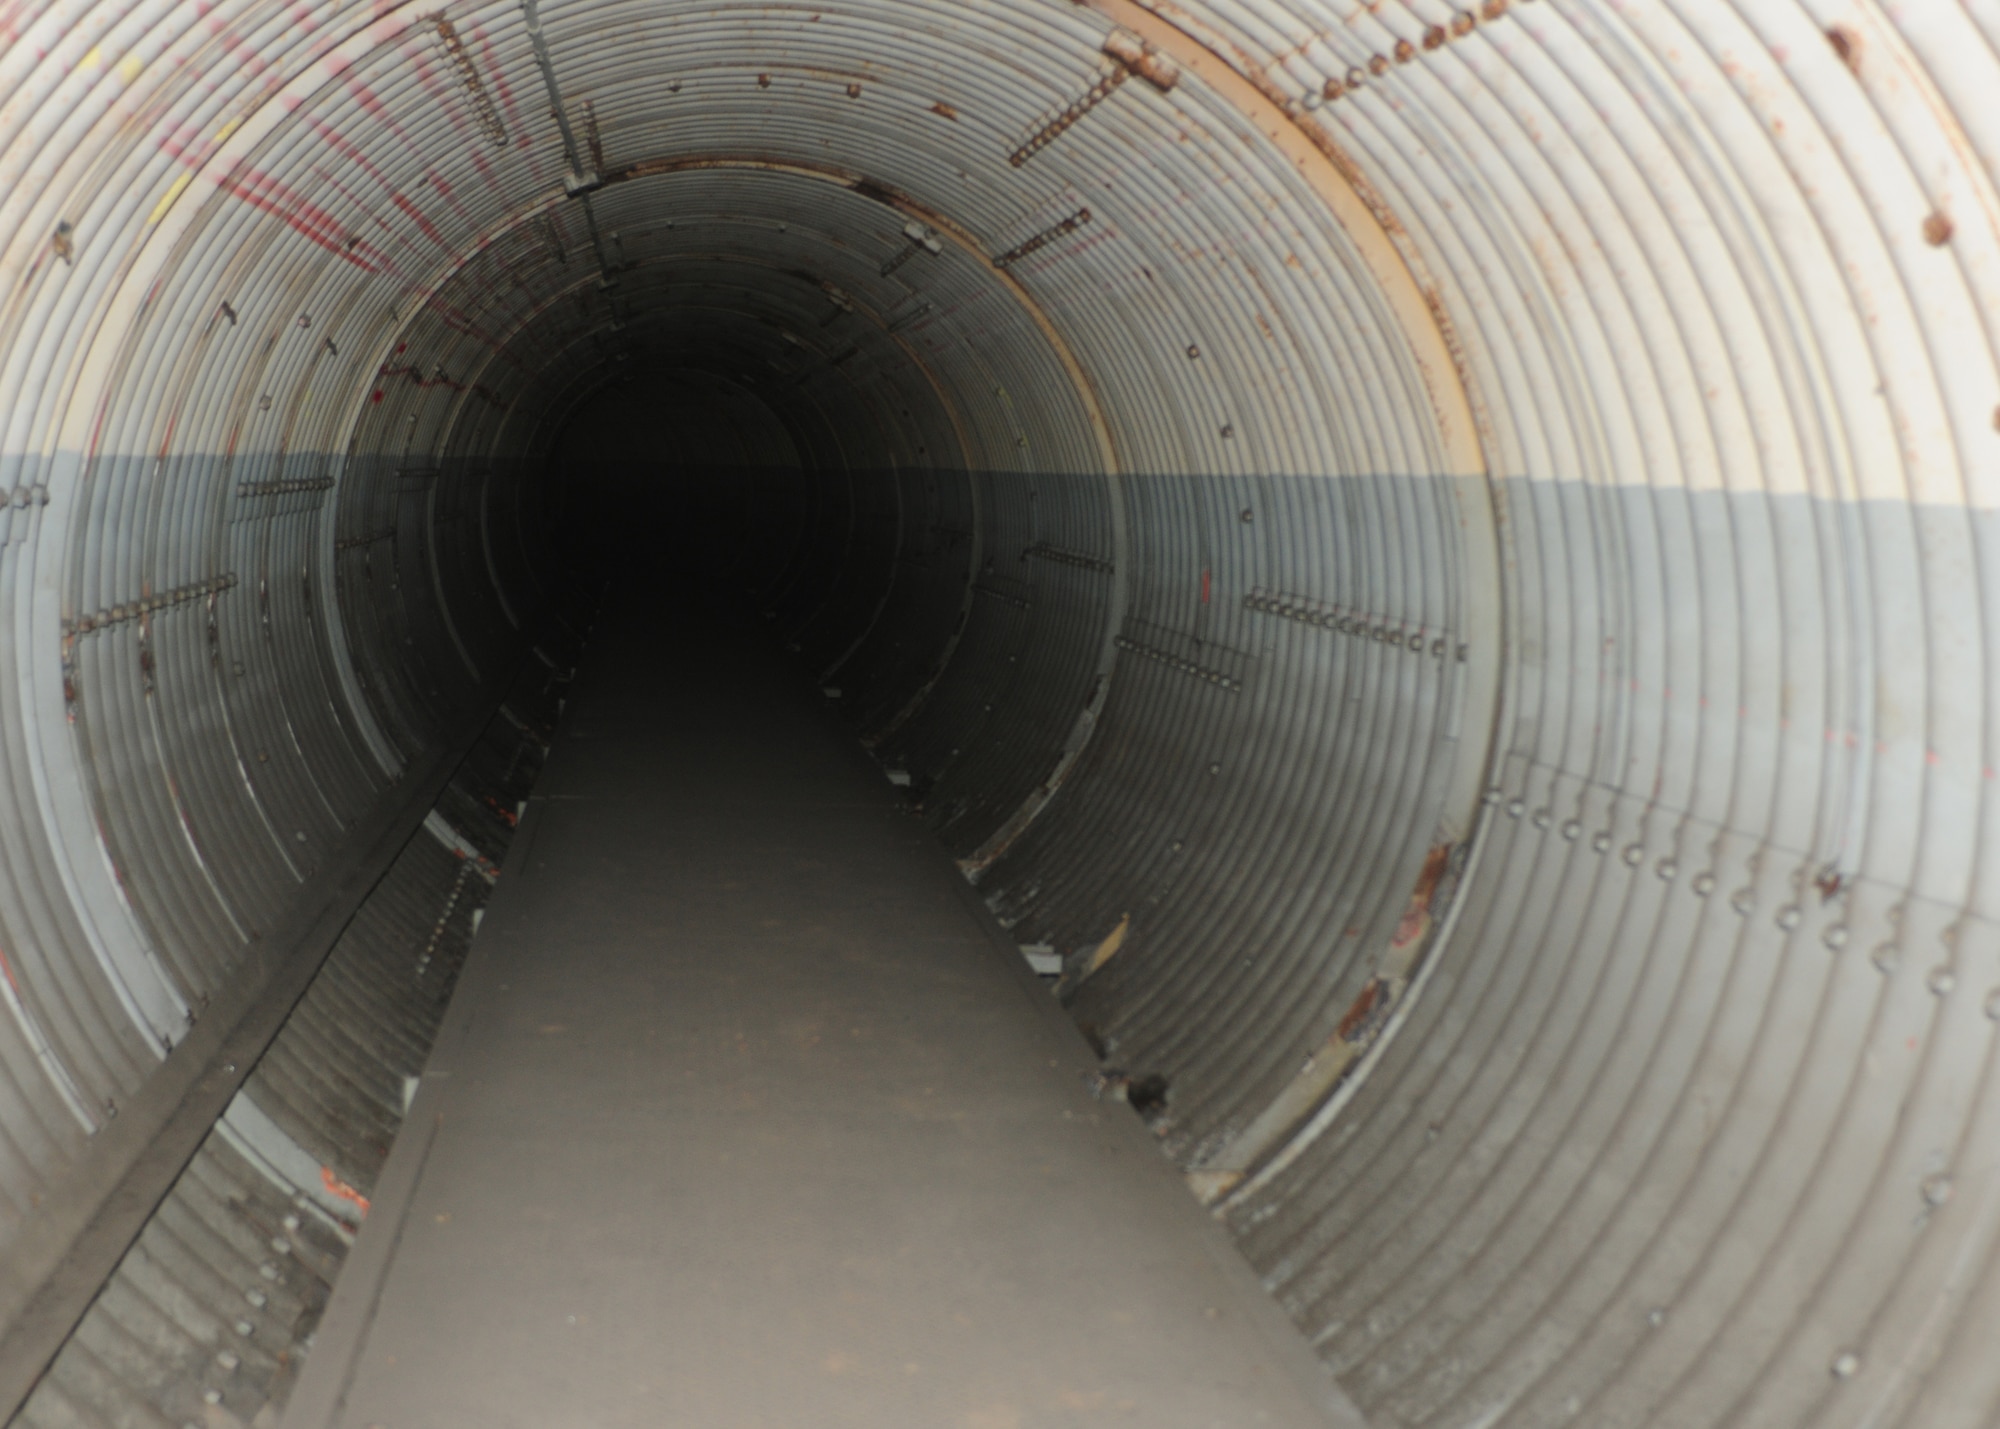 A photo of what used to be the 851st Strategic Missile Squadron, Titan 1 Intercontinental Ballistic Missile Complex 4C tunnels at Chico, Calif., May 23, 2013. This complex is currently privately owned and is not open to the public. (U.S. Air Force photo by Senior Airman Allen Pollard/Released)